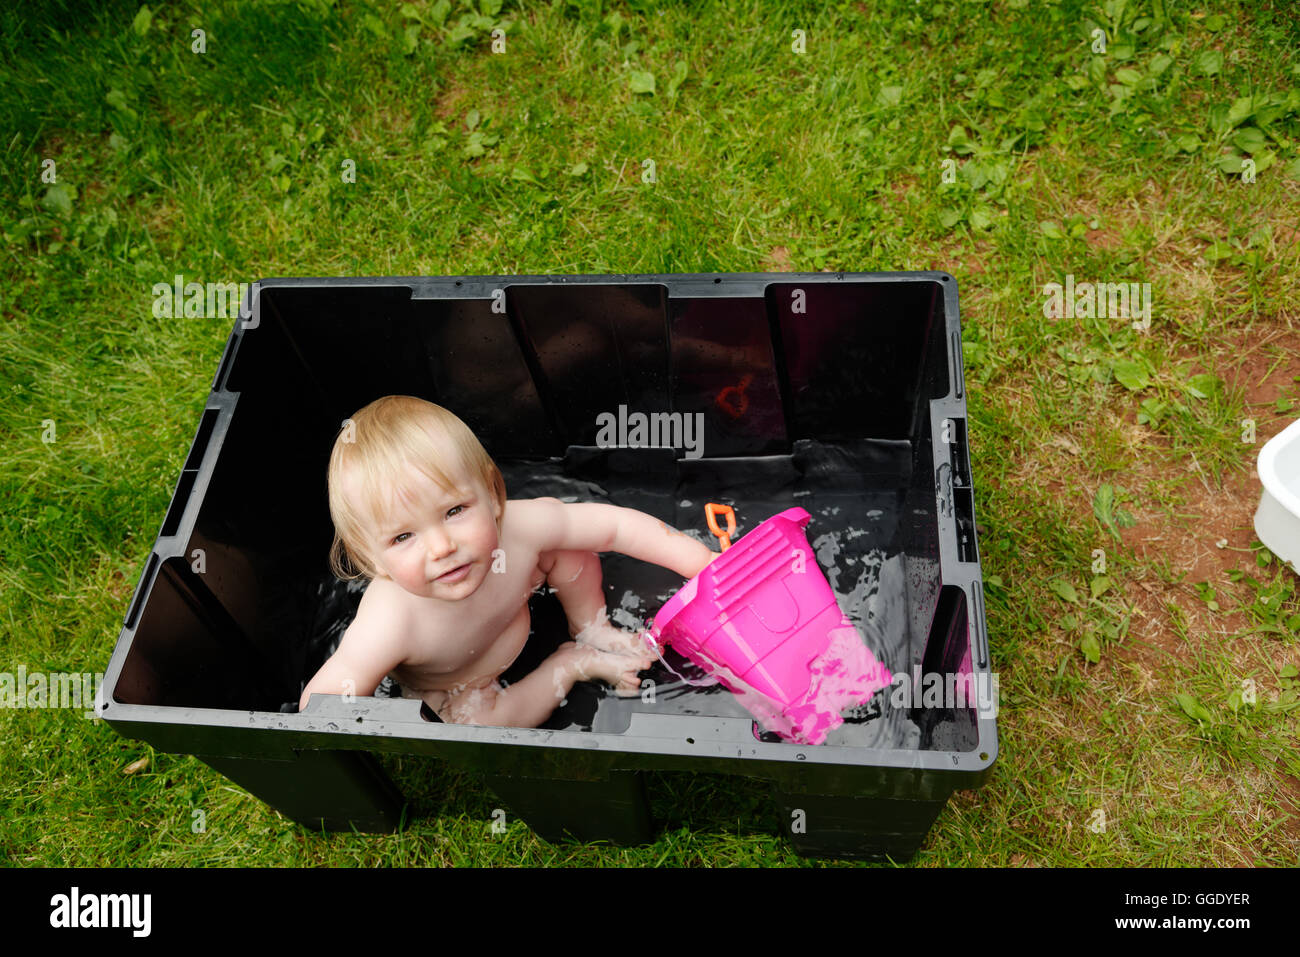 A little girl (2 years old) being bathed in a plastic box while camping Stock Photo